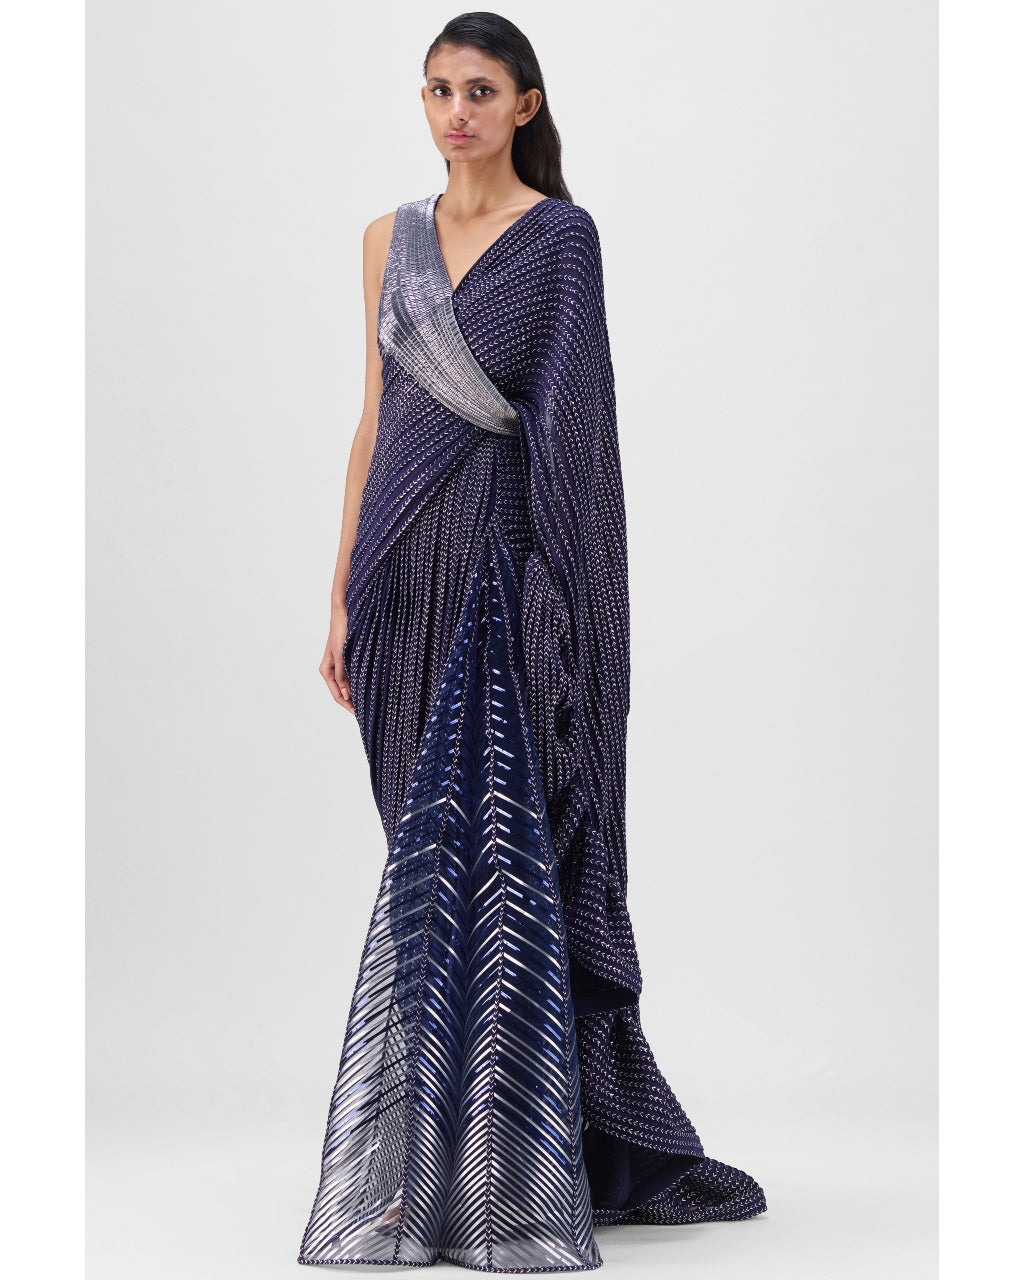 Metallic Structured Gown With Ruffle Braided Drape Set